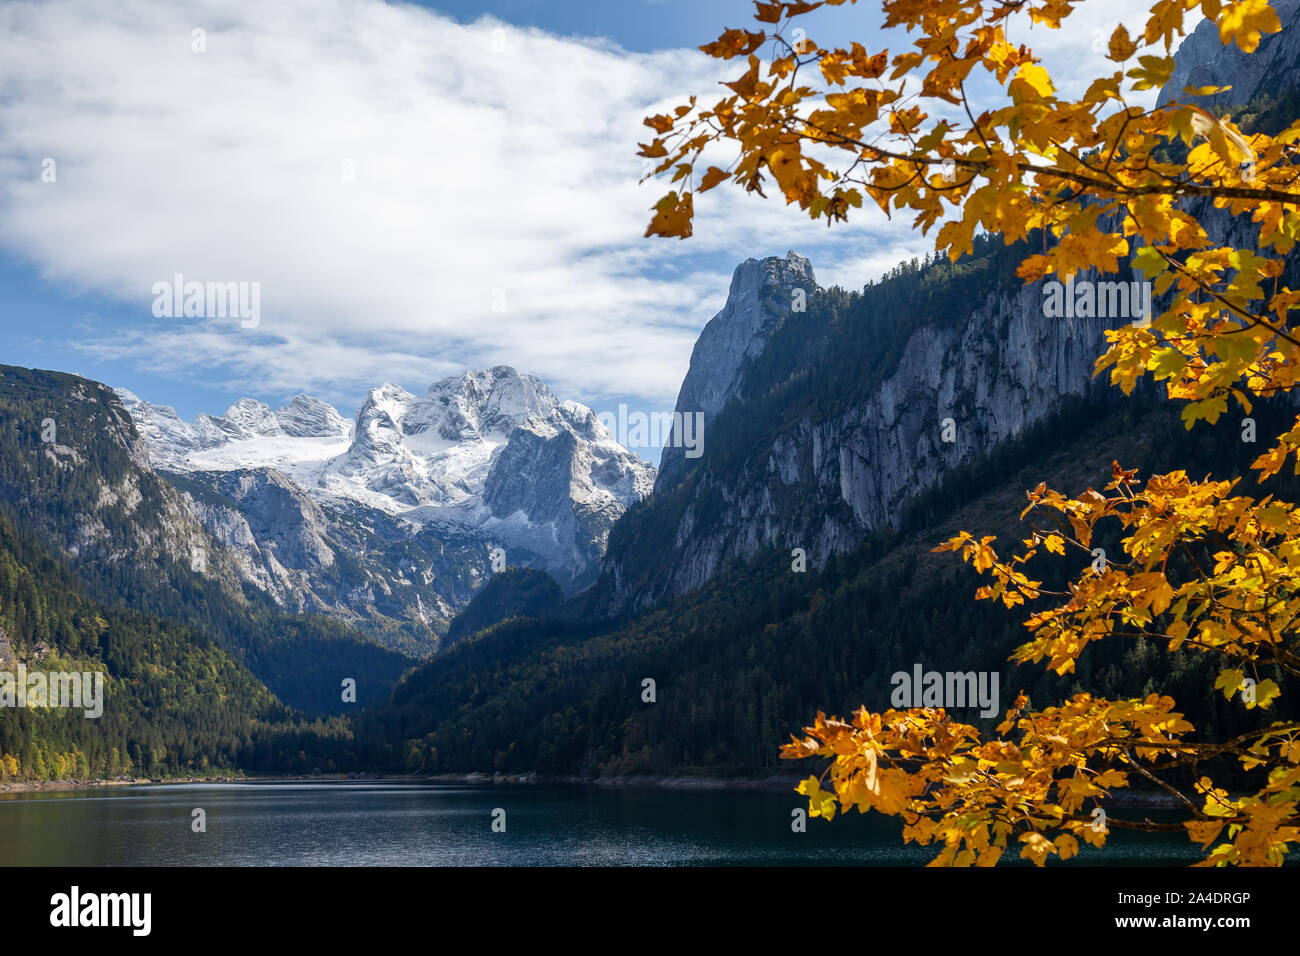 Mount Dachstein seen from famous Lake Gosau, Austria. A colorfull autumn spectacle is ongoing in the alps with a yellow, orange maple tree nicely illu Stock Photo